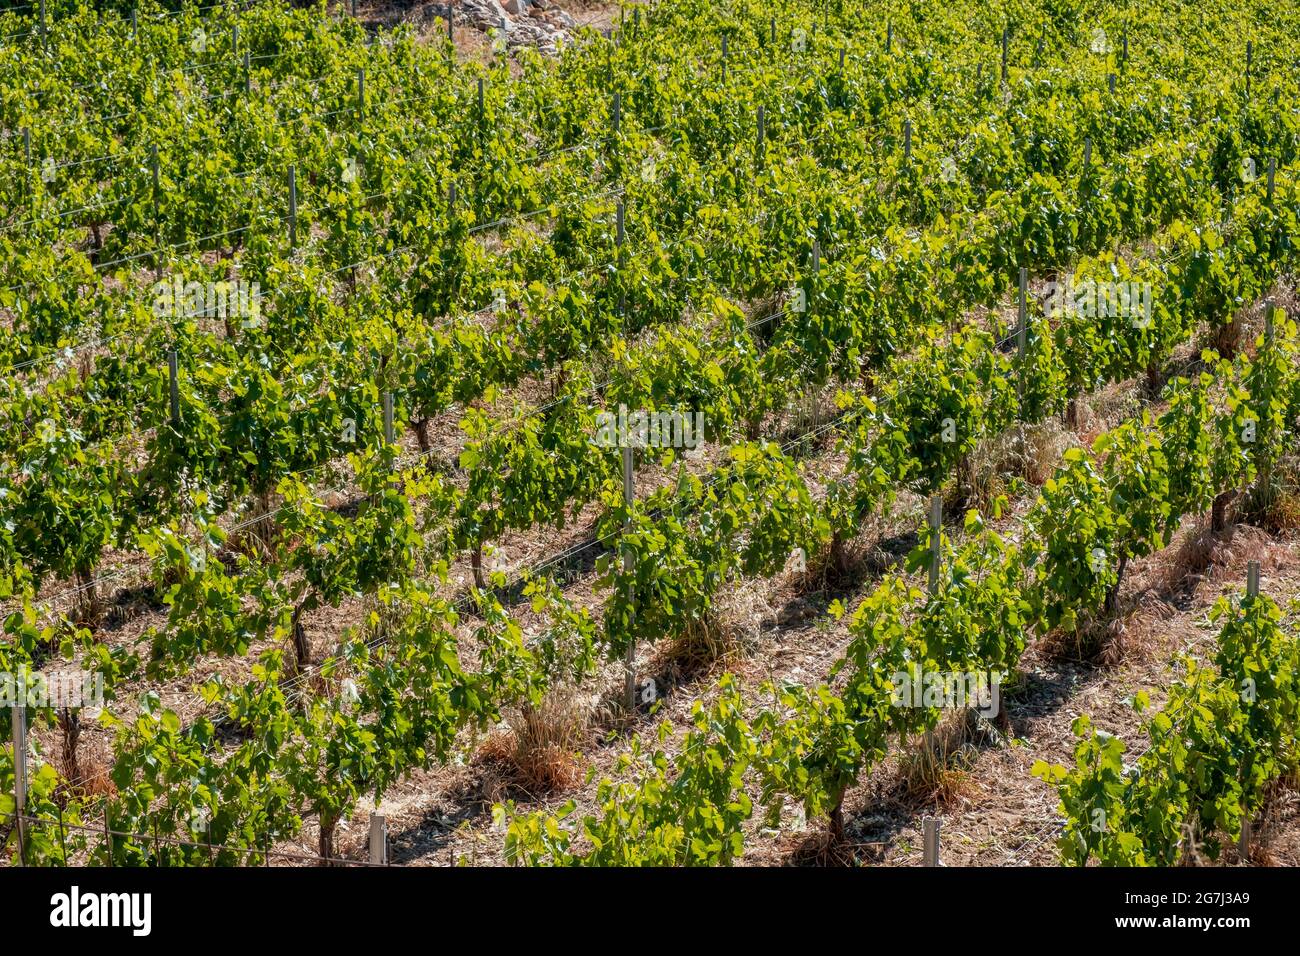 Vineyard grapevines background. Greek island wine making concept. Grape vines in rows, fresh plants on metal wire structure. Sunny summer day in Sifno Stock Photo